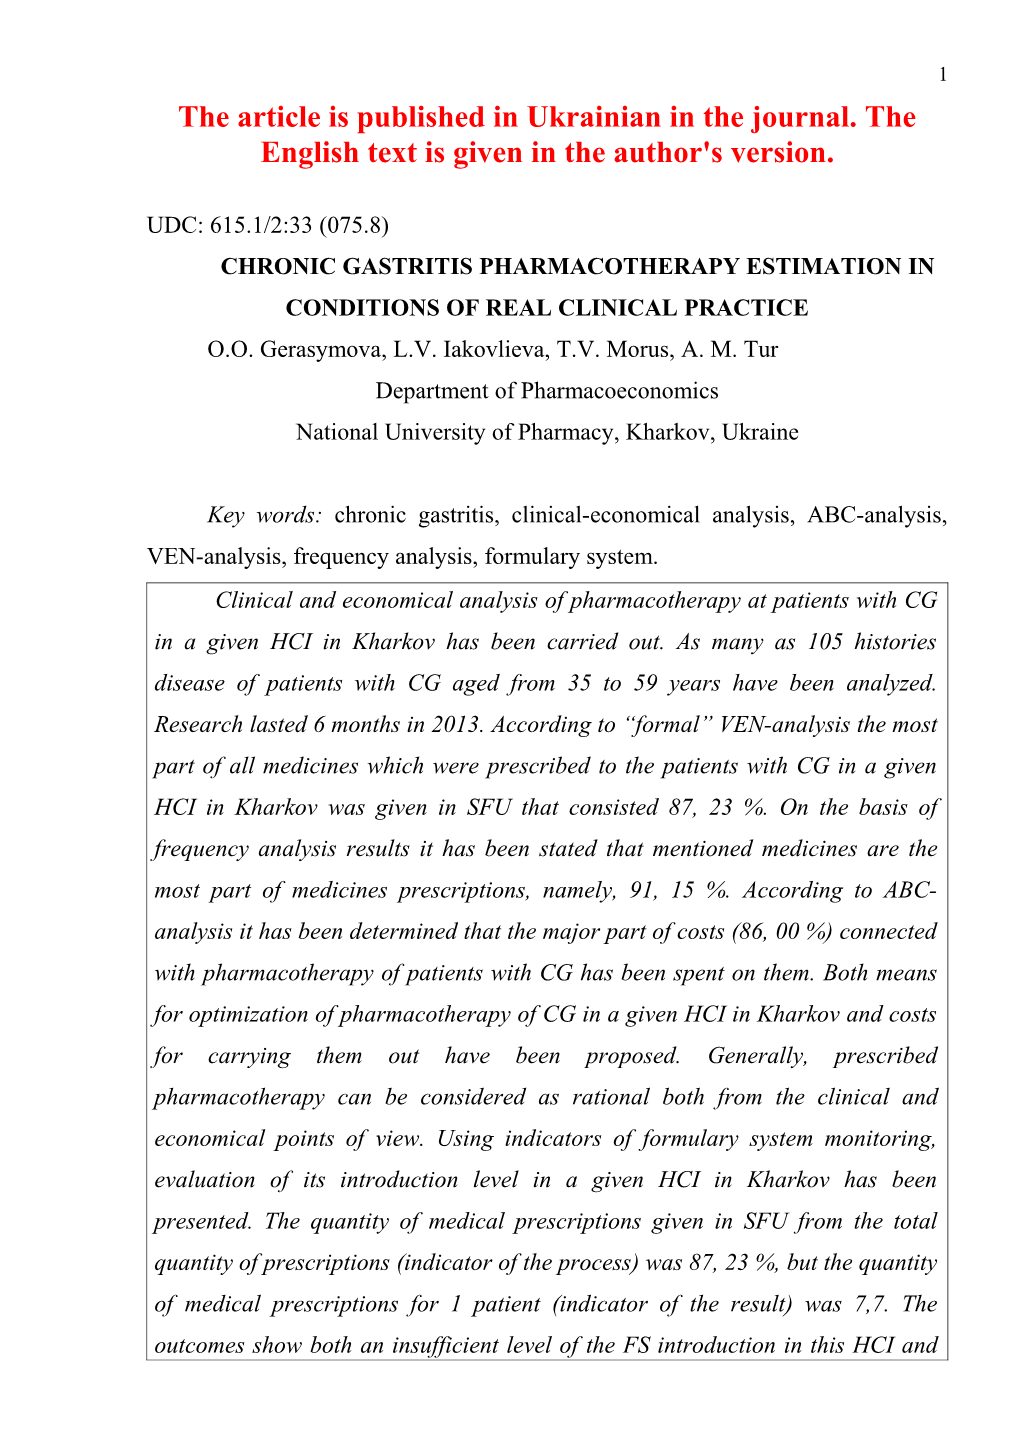 Chronic Gastritispharmacotherapy Estimation in Conditions of Real Clinical Practice